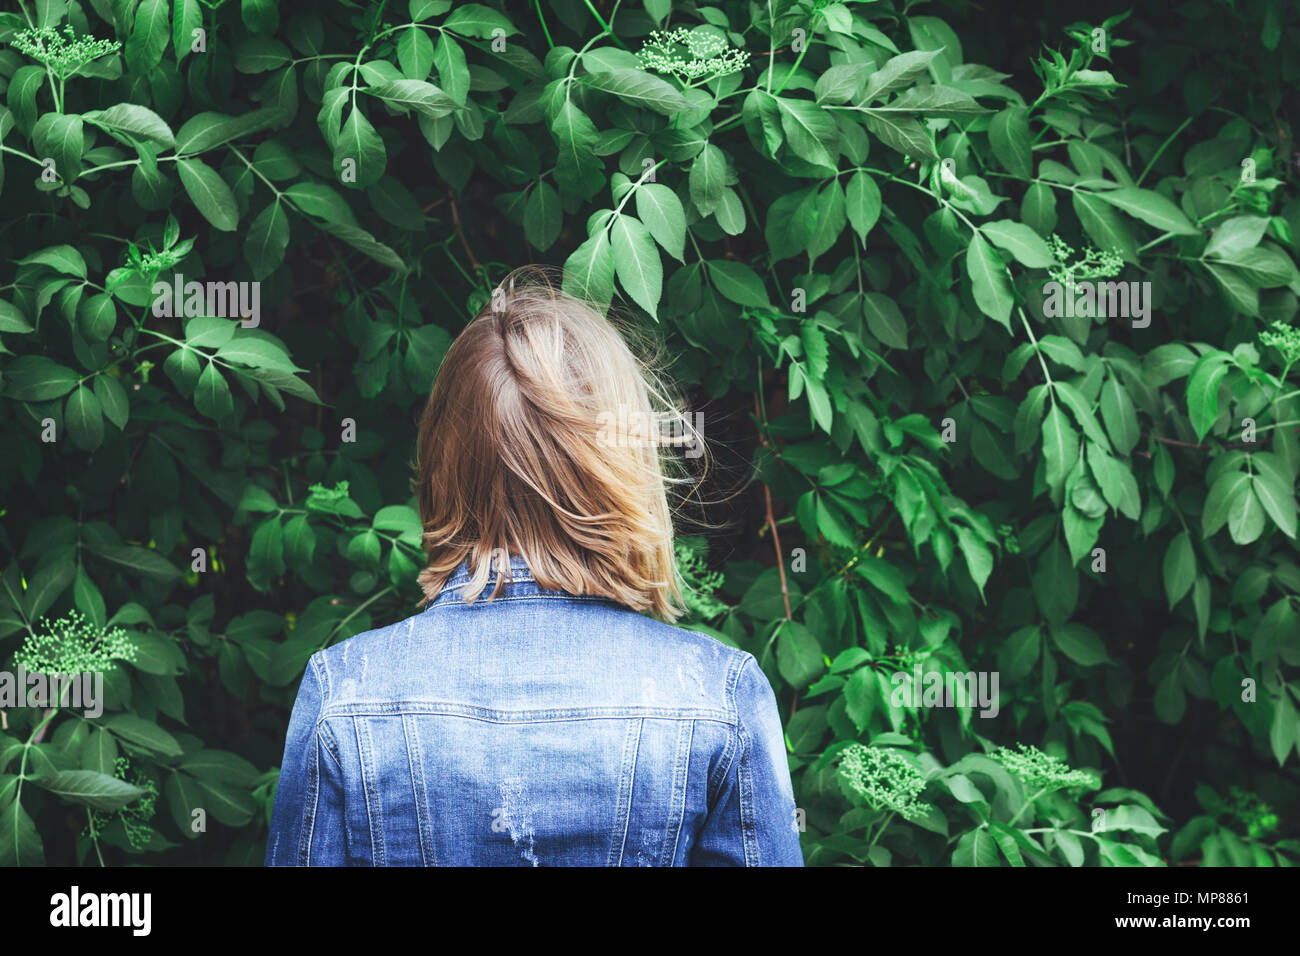 Blond woman standing backwards and looking on the green leaves in windy weather. Conceptual realism. Stock Photo